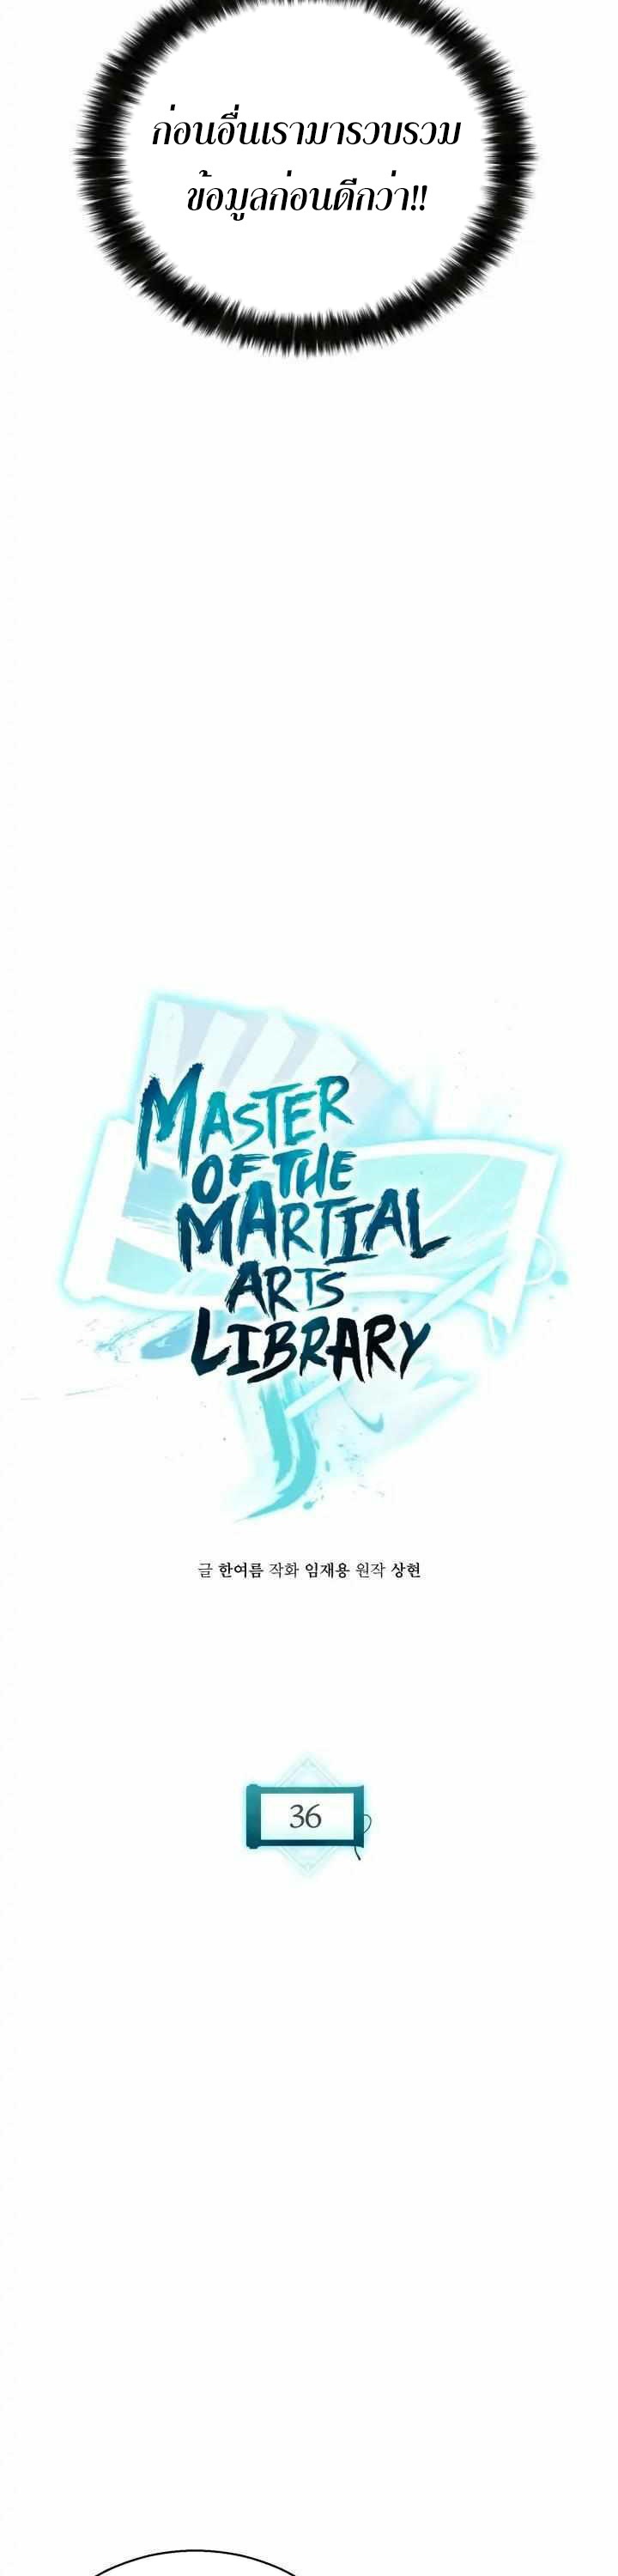 Lord of the Martial Arts Library 36 (14)